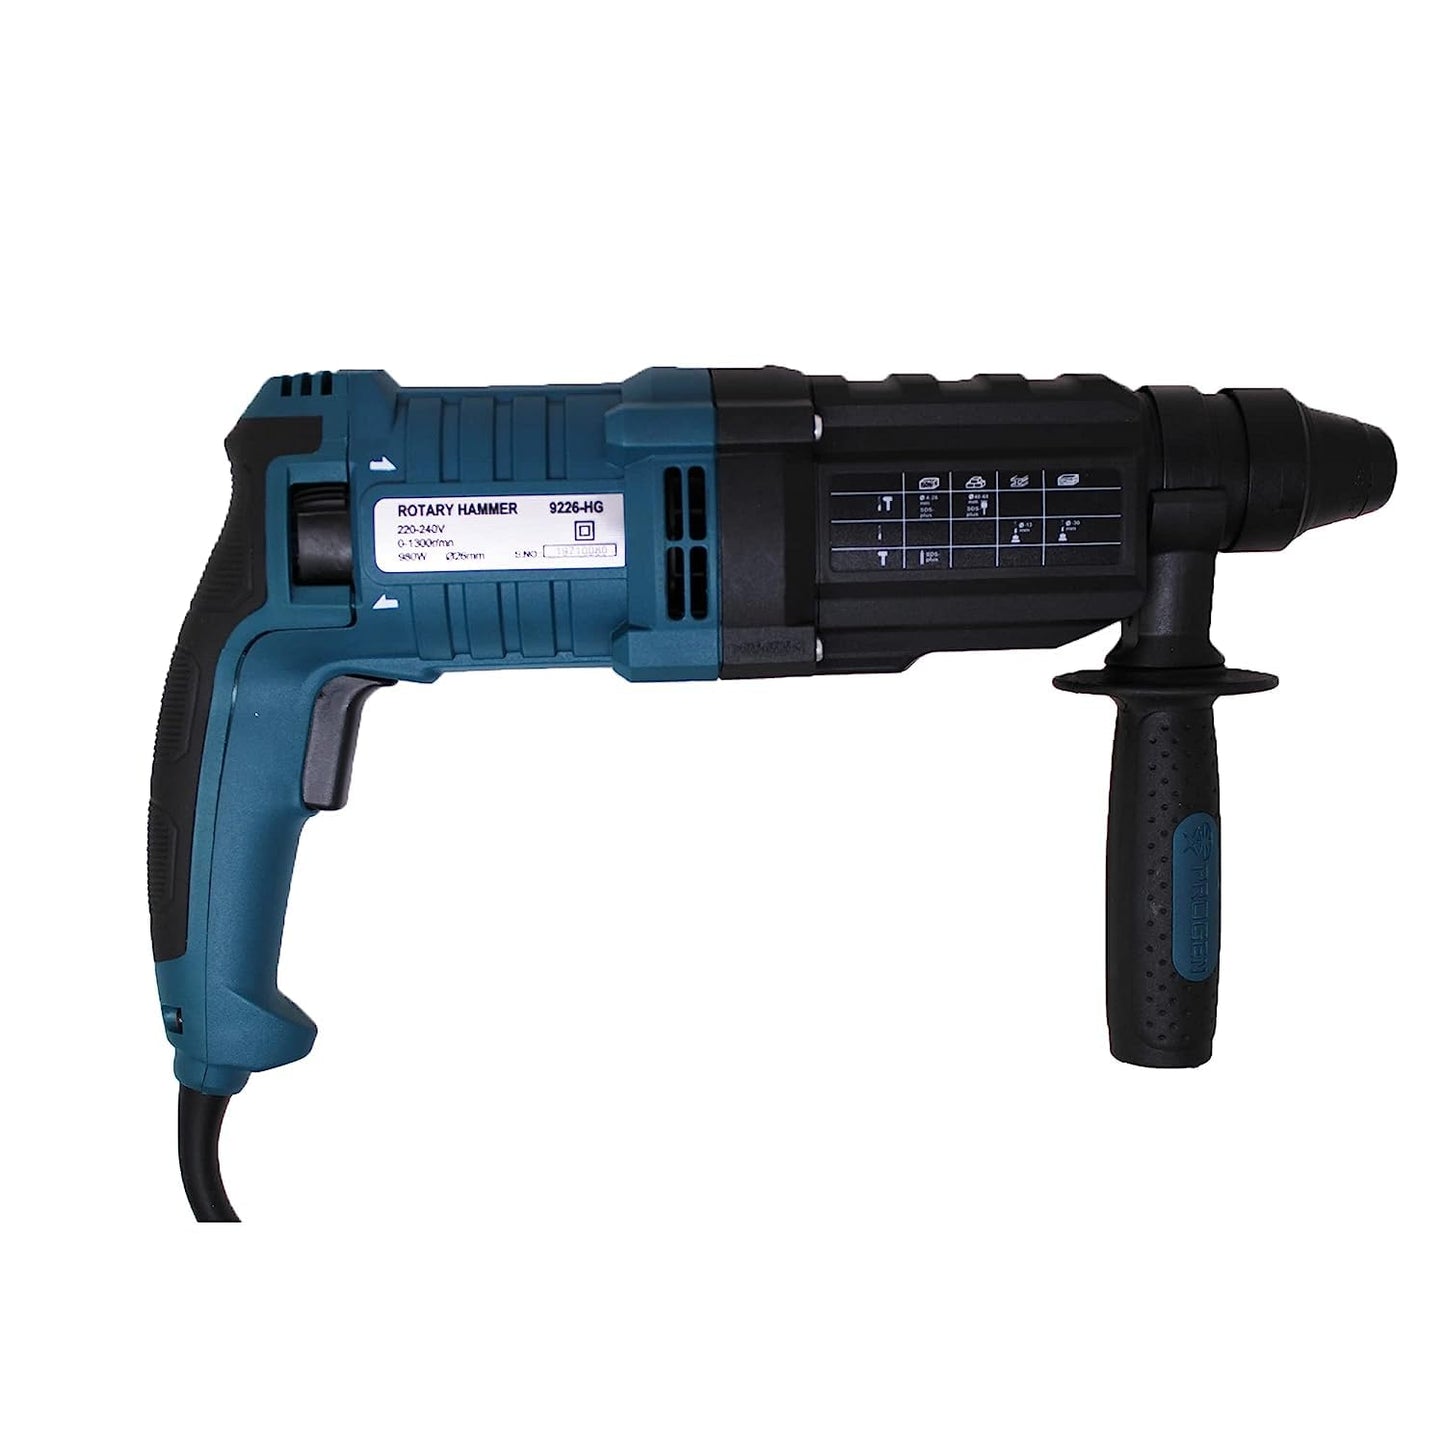 PROGEN 9226HG 980W Heavy Duty 26mm Rotary Hammer Drill, Variable Speed Reversible Function with 5 Bits For Hammering, Chiseling on Wood, Metal, Concrete (1300 Rpm)